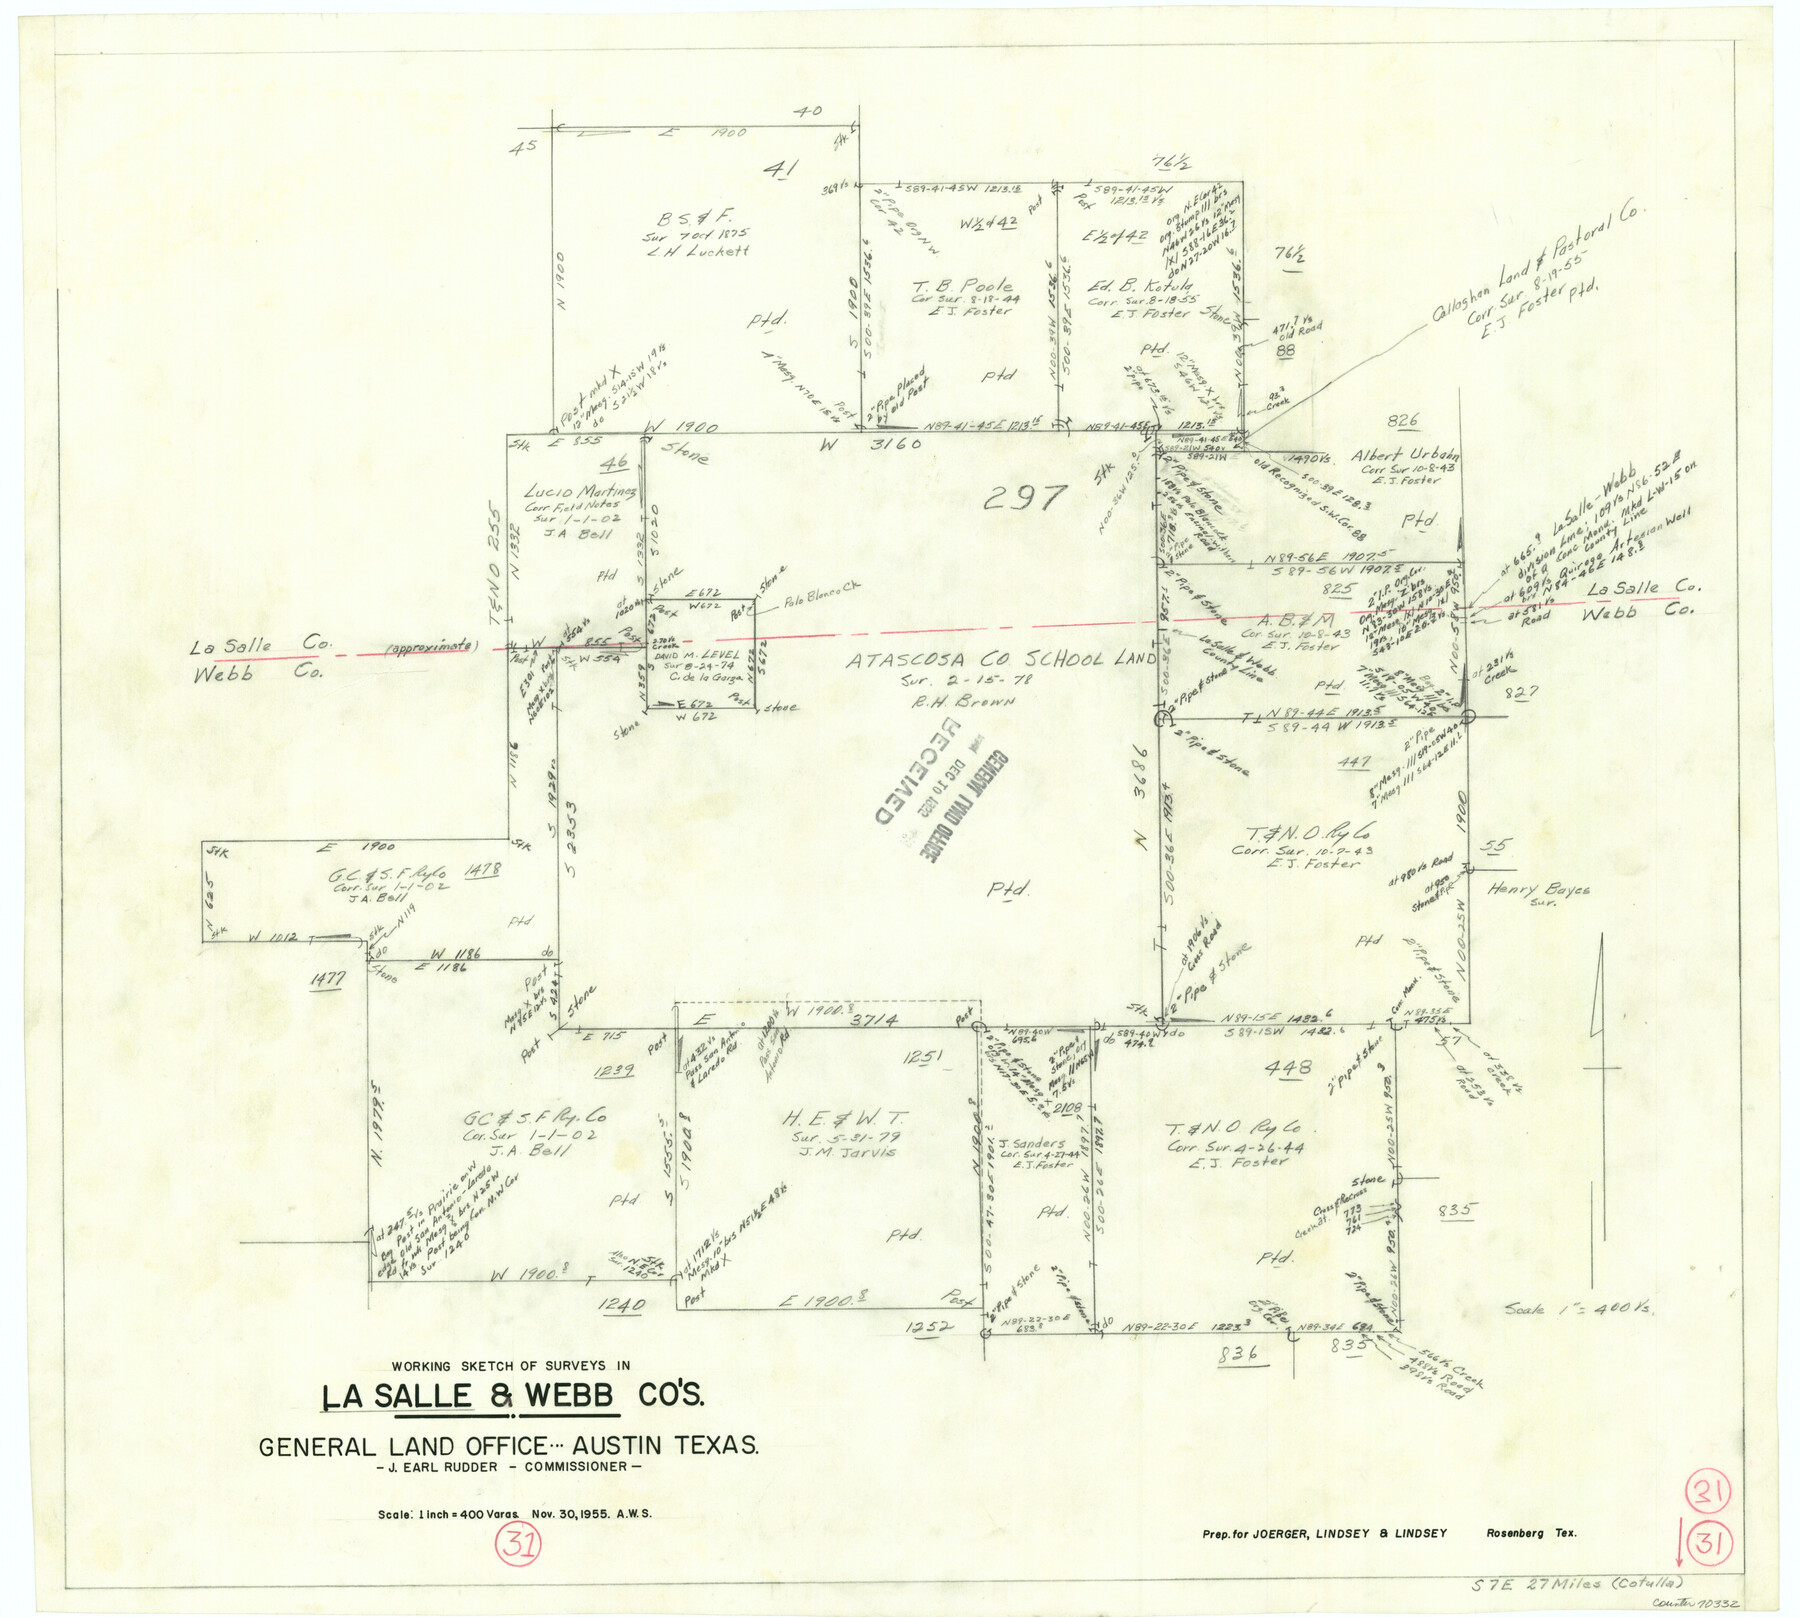 70332, La Salle County Working Sketch 31, General Map Collection